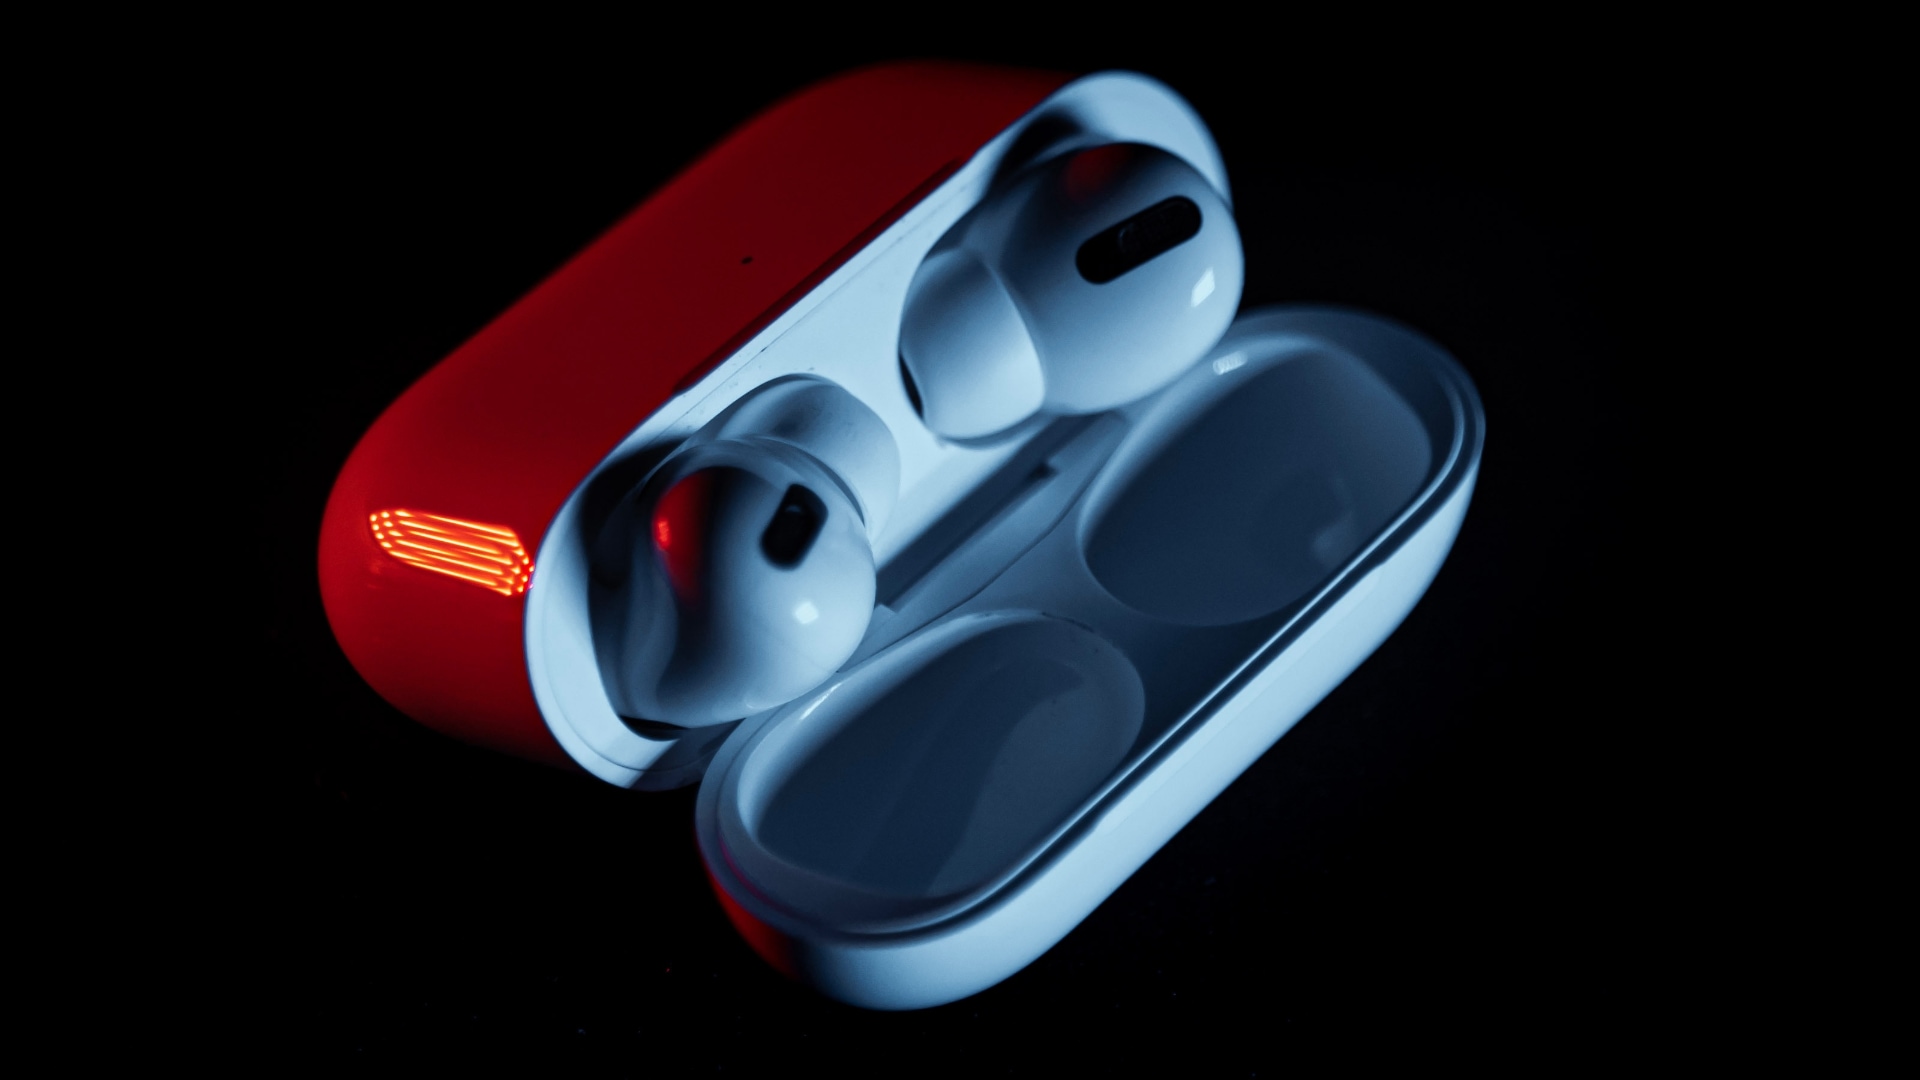 Recent AirPods and Beats firmwares patched a major Bluetooth vulnerability